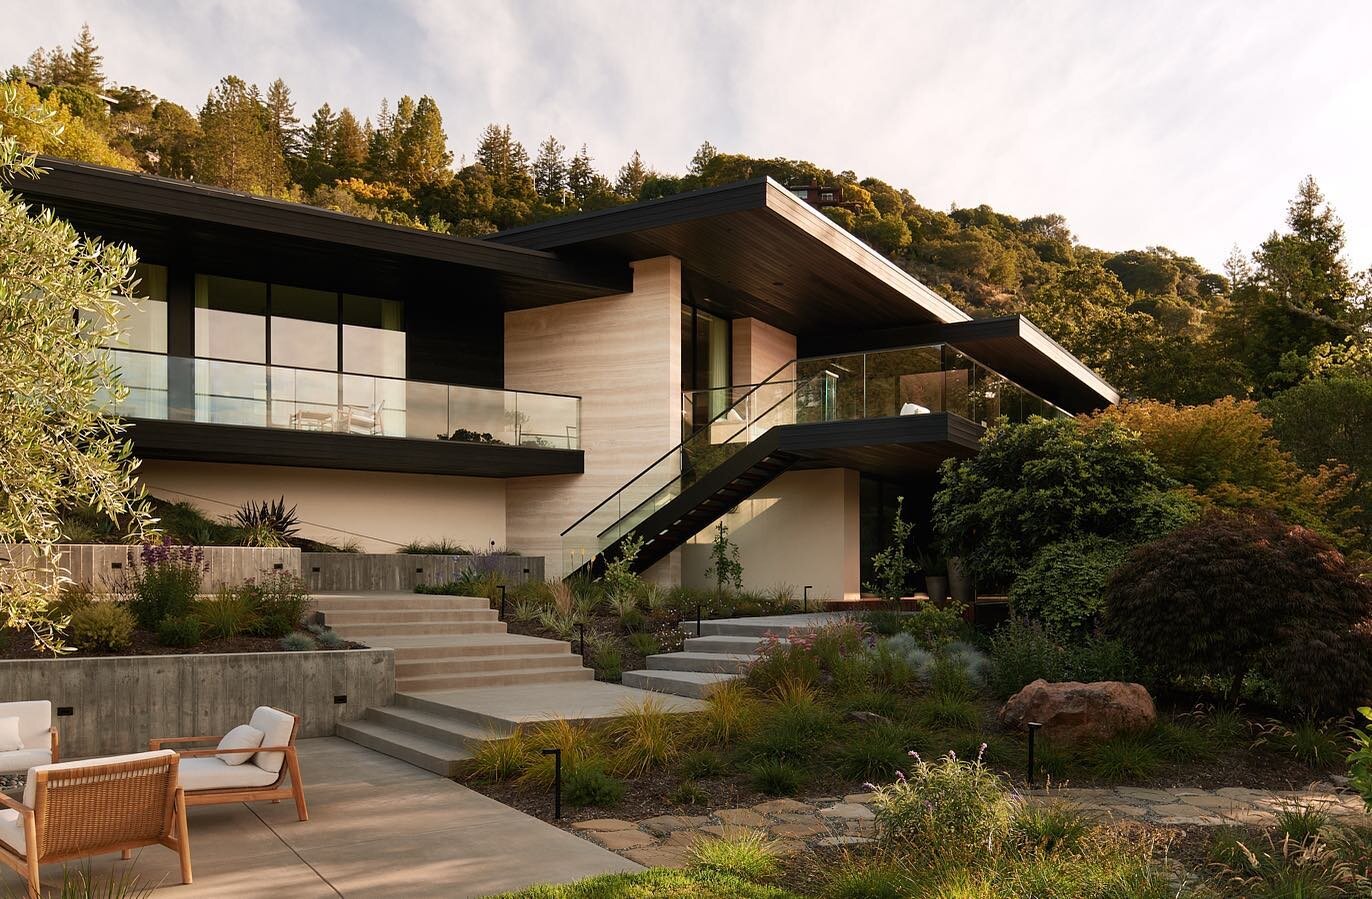 This 6,500 square foot modern home designed by @swattmiers was almost entirely rebuilt on a similar footprint to the original 1950&rsquo;s structure in order to capture the spectacular views of San Francisco, the bay and Mt. Tam. 

Architecture: @swa